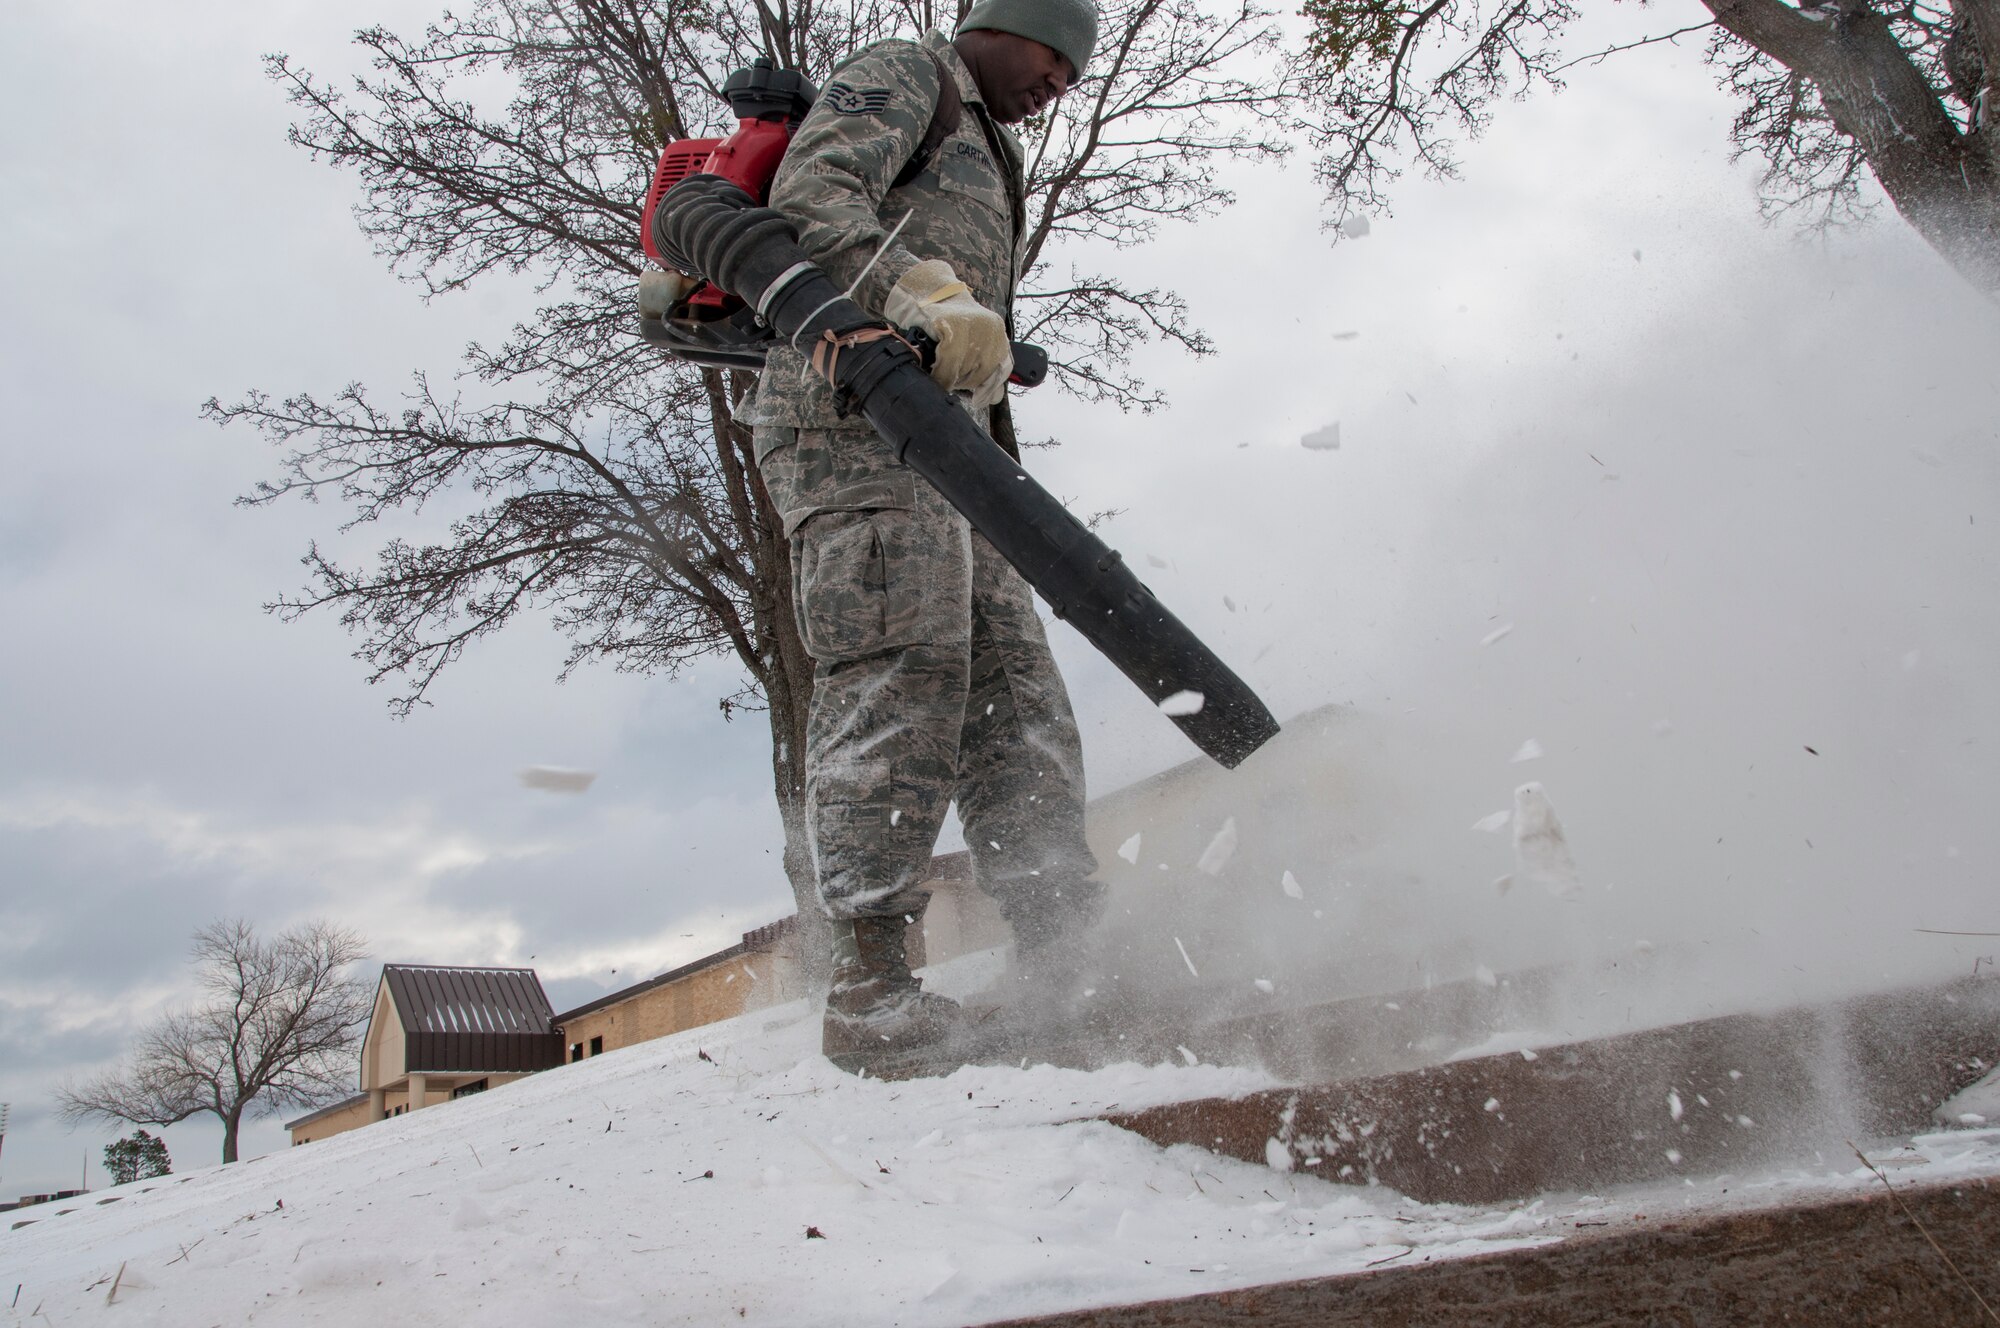 Staff Sgt. Erik Cartwright uses a leaf blower to remove snow from the steep steps between the 507th Air Refueling Wing headquarters building and the 507th Logistics Readiness Squadron.  The storm moved into the central Oklahoma area Thursday Feb. 6, 2014, dumping nearly three inches of light powdery snow on Tinker AFB.  Members of the 507th spent limited time getting areas cleared up as wind chills were minus 15.  (U.S. Air Force photo/Senior Airman Mark Hybers)